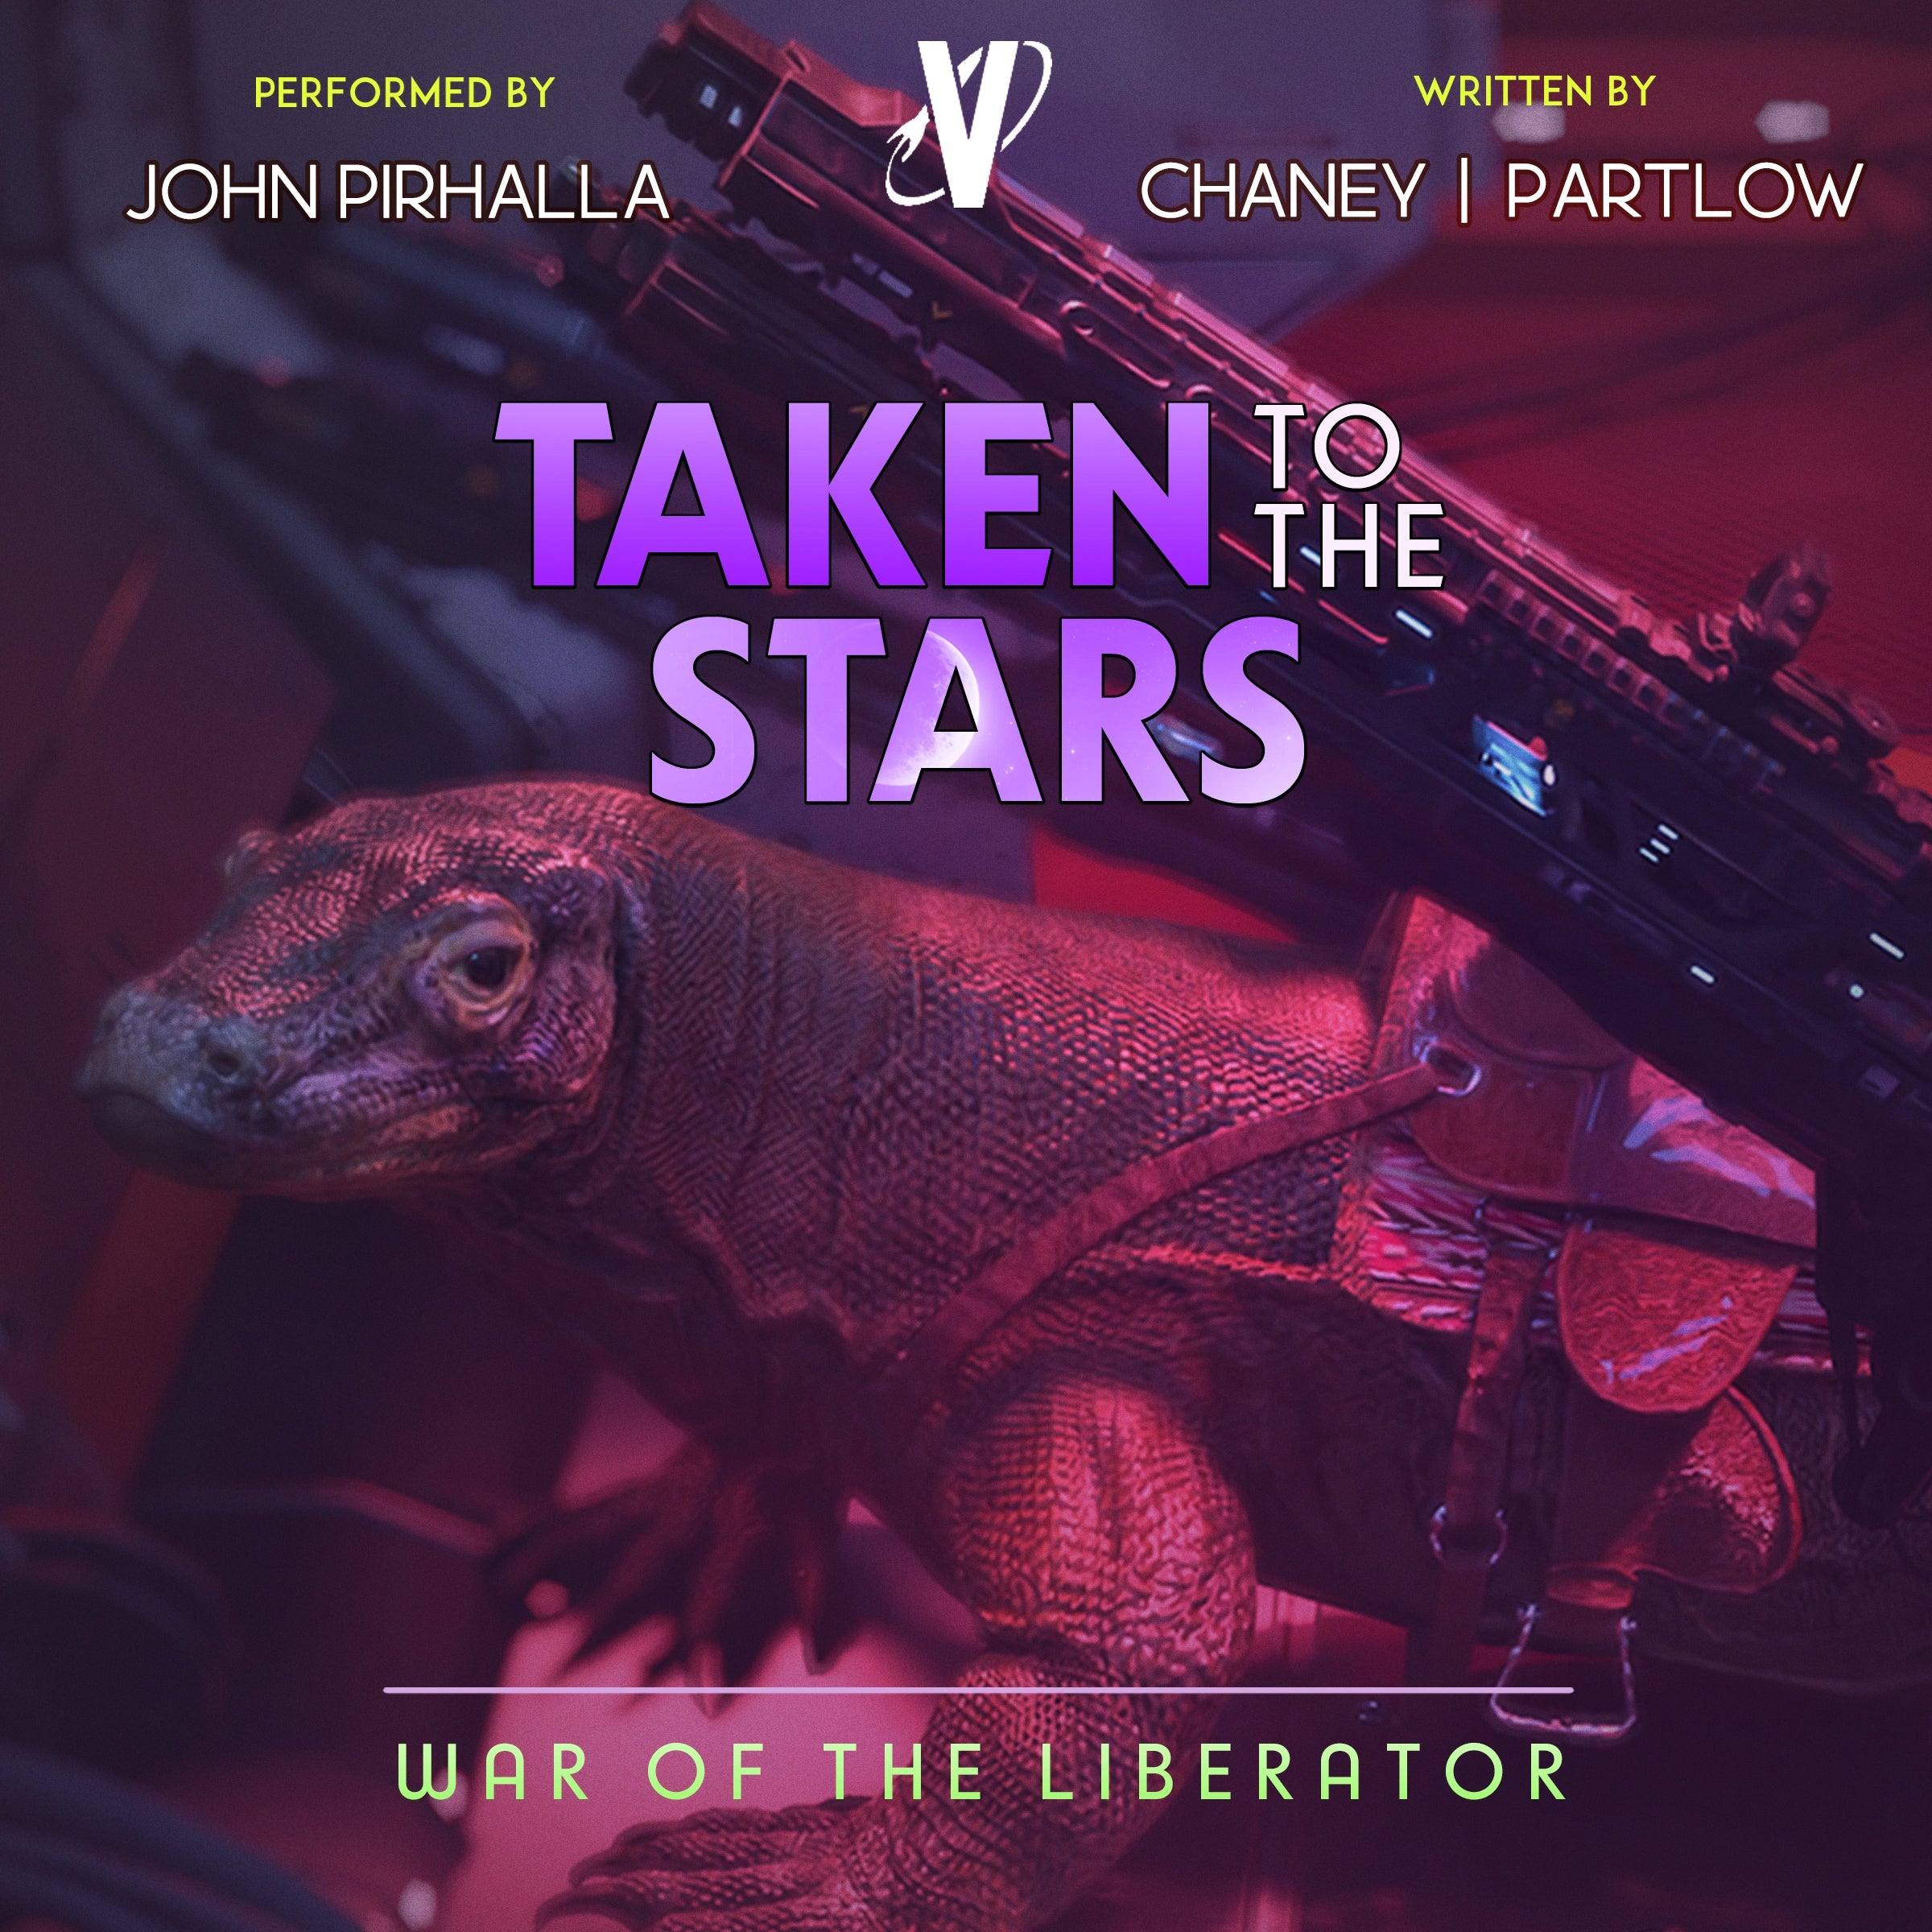 Taken to the Stars 2 Audiobook: War of the Liberator